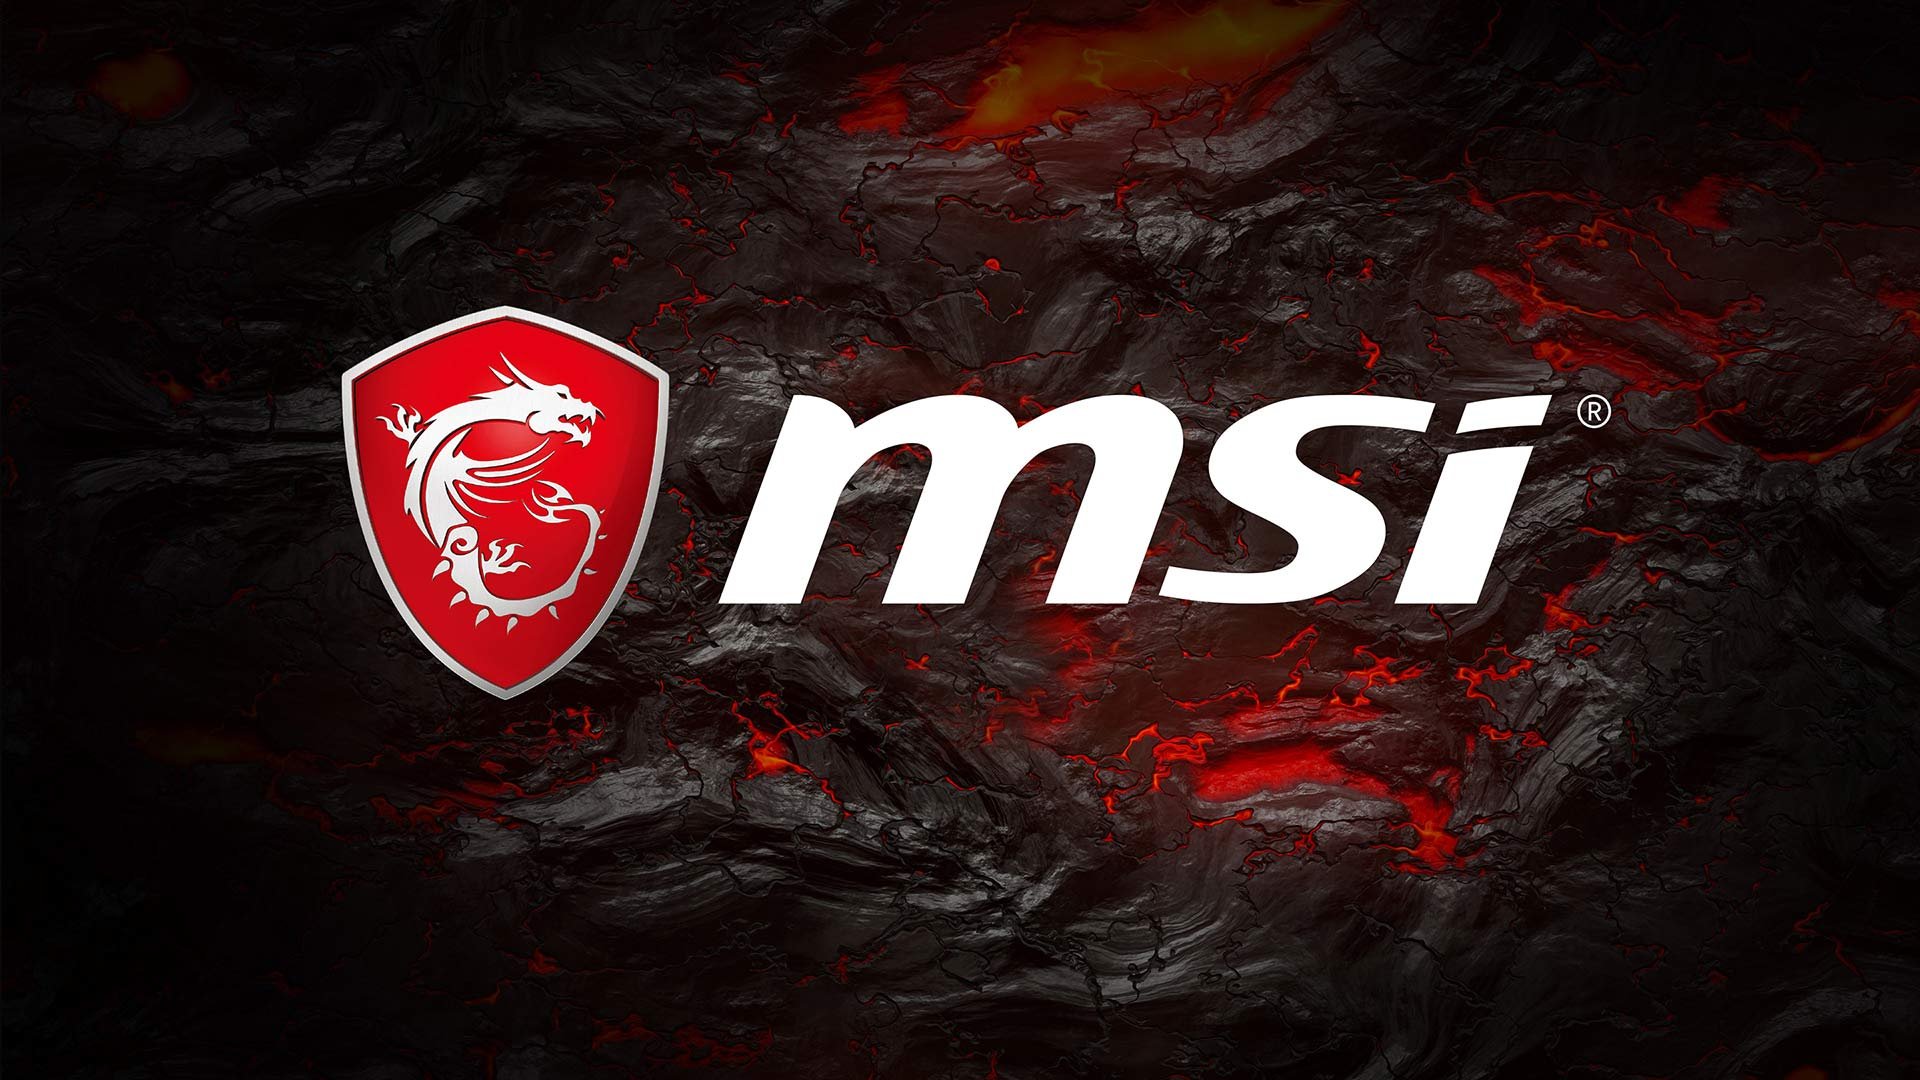 More information about "MSI GTX 970"